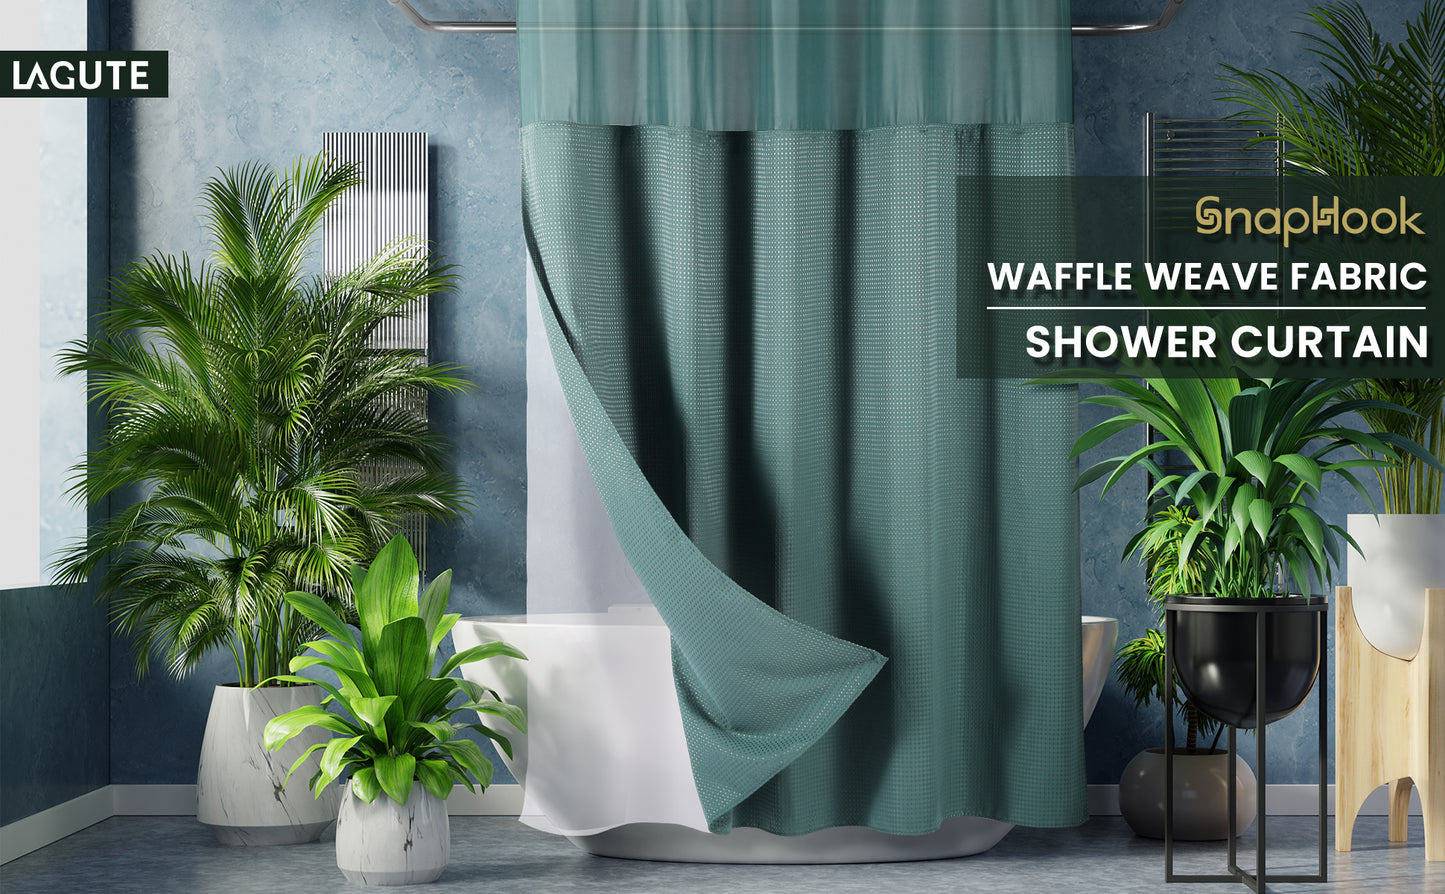 SnapHook Waffle Weave Fabric Shower Curtain with Snap-in Liner | 71WX78L, Sea Teal